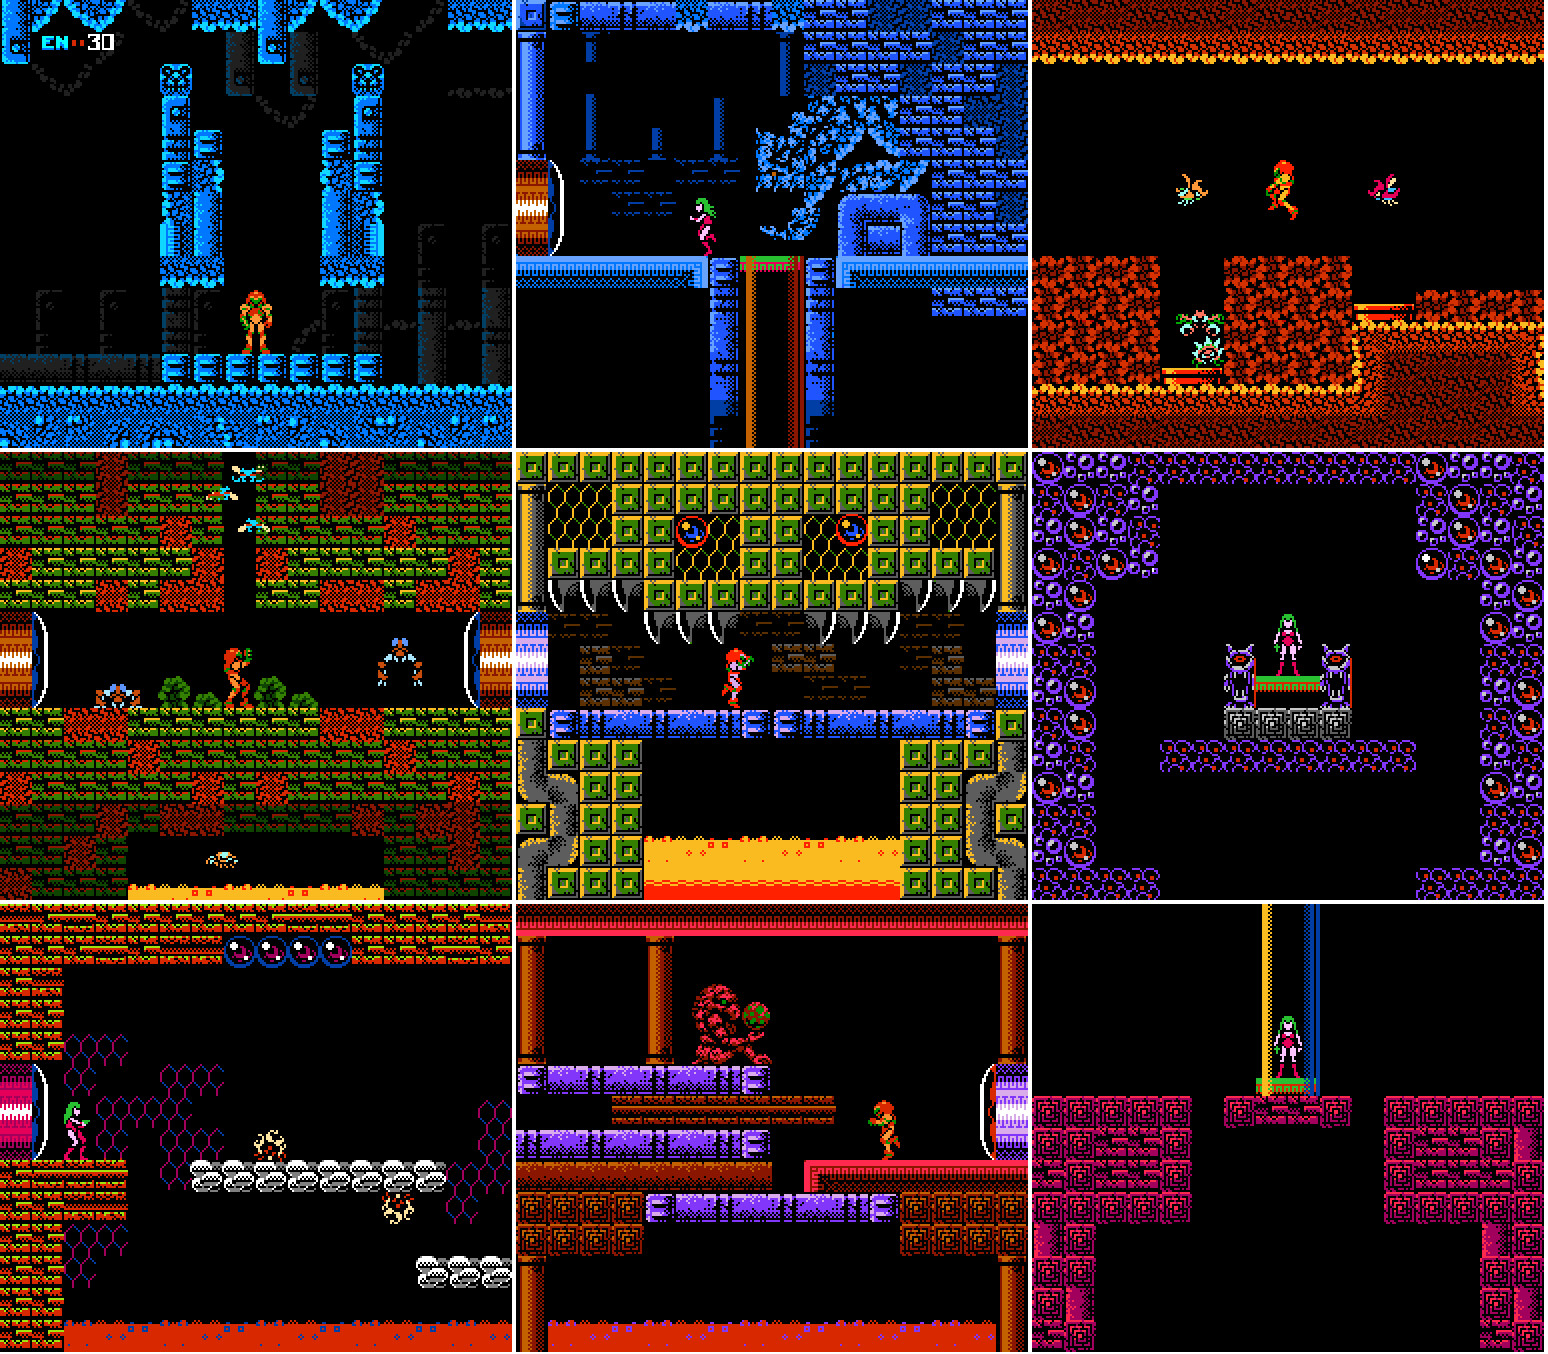 Mosaic of rooms made with my tiles and sprites for the project